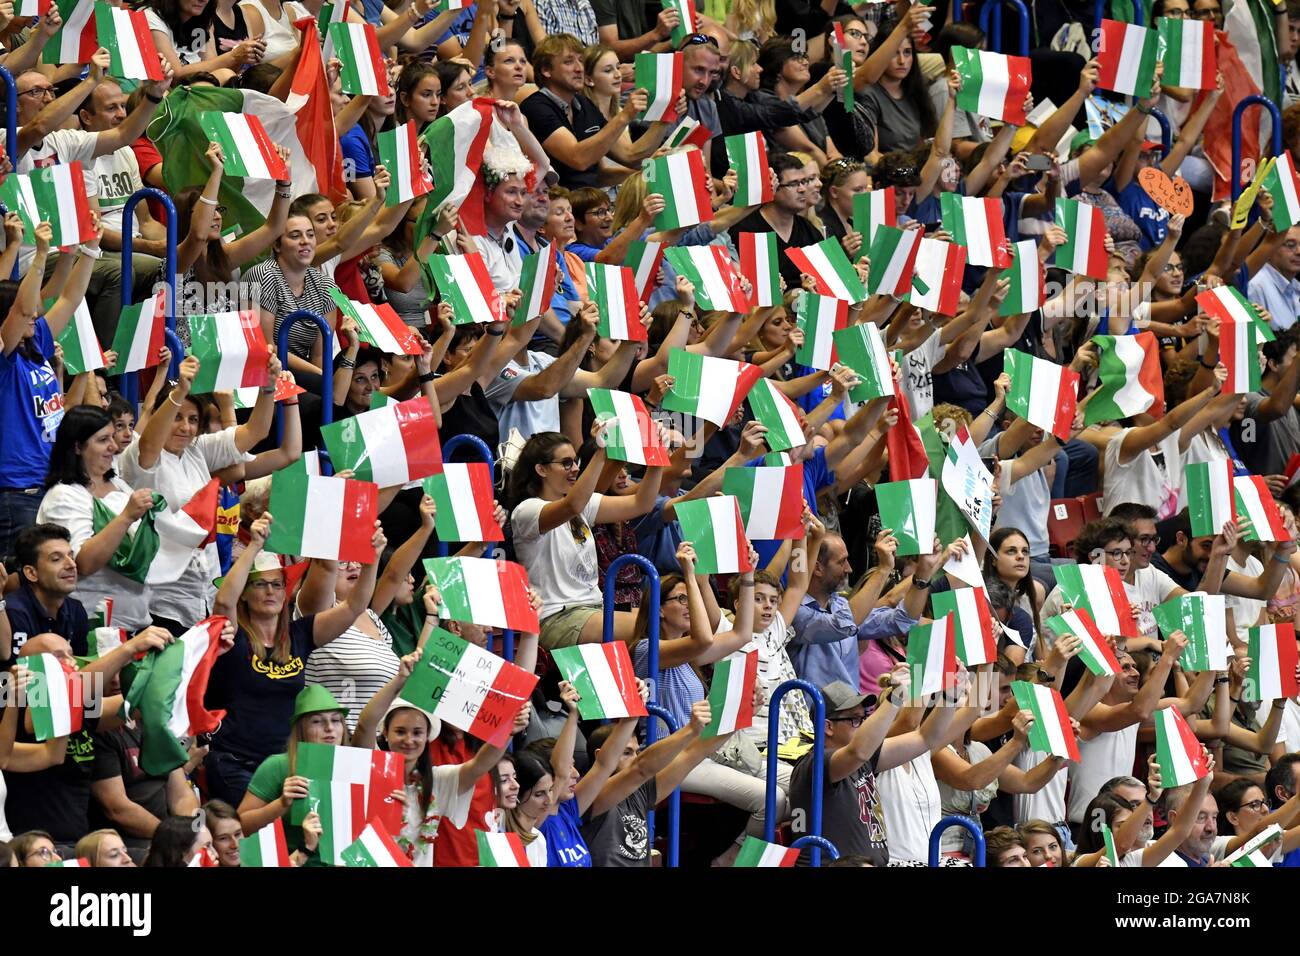 Italian fans cheering and waving Italian flags at the indoor Forum arena, during the Volleyball Men's World Championship, in Milan. Stock Photo